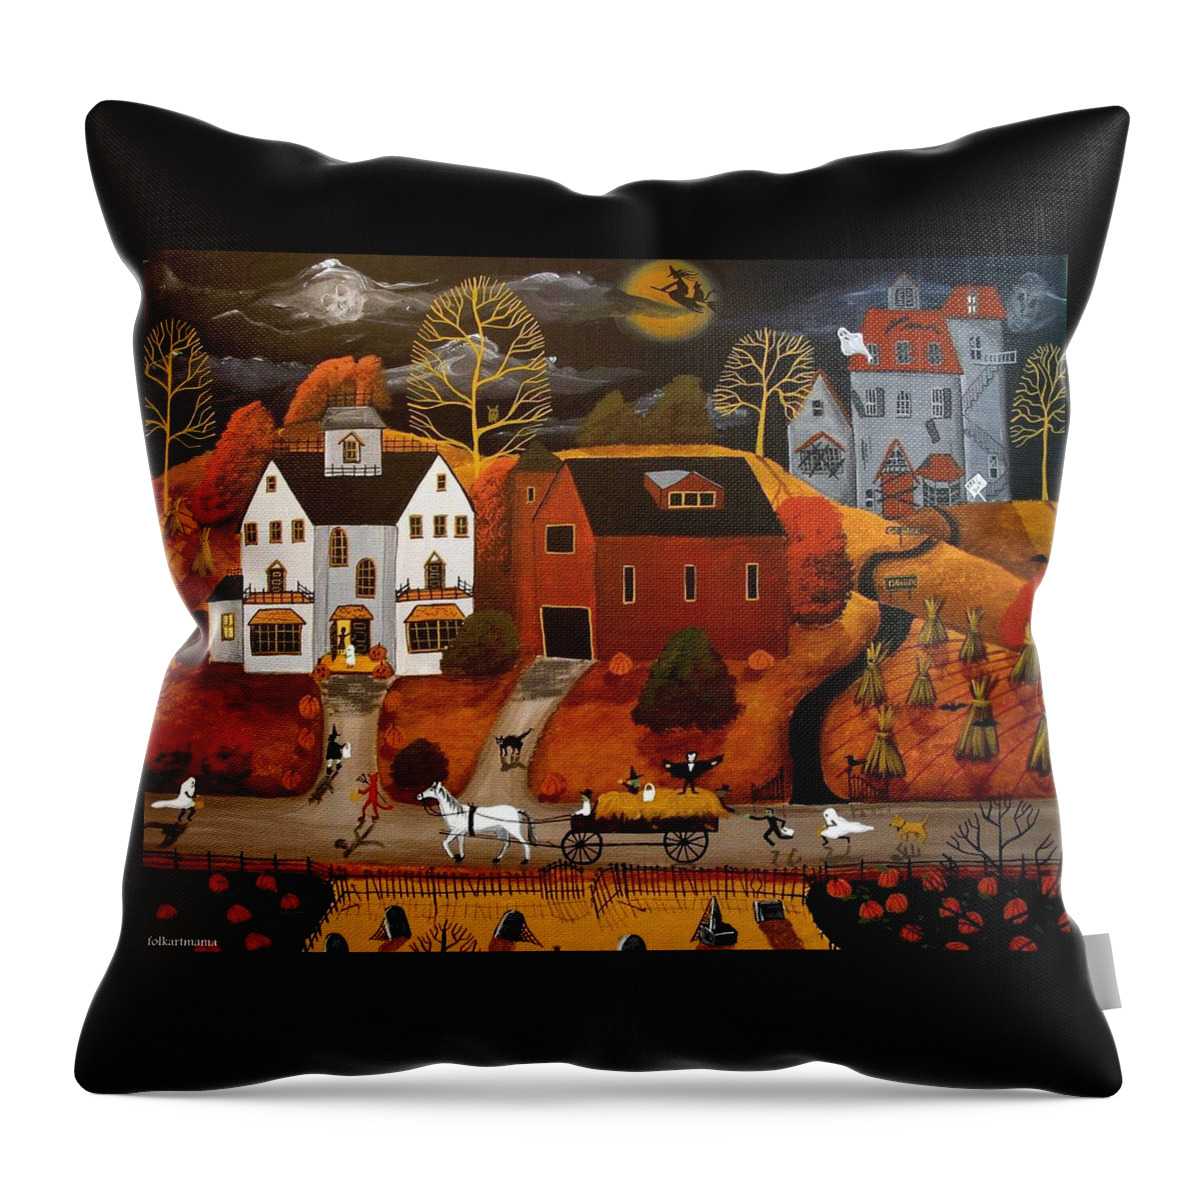 Folk Art Throw Pillow featuring the painting Halloween Hay Ride - a folkartmama - folk art by Debbie Criswell